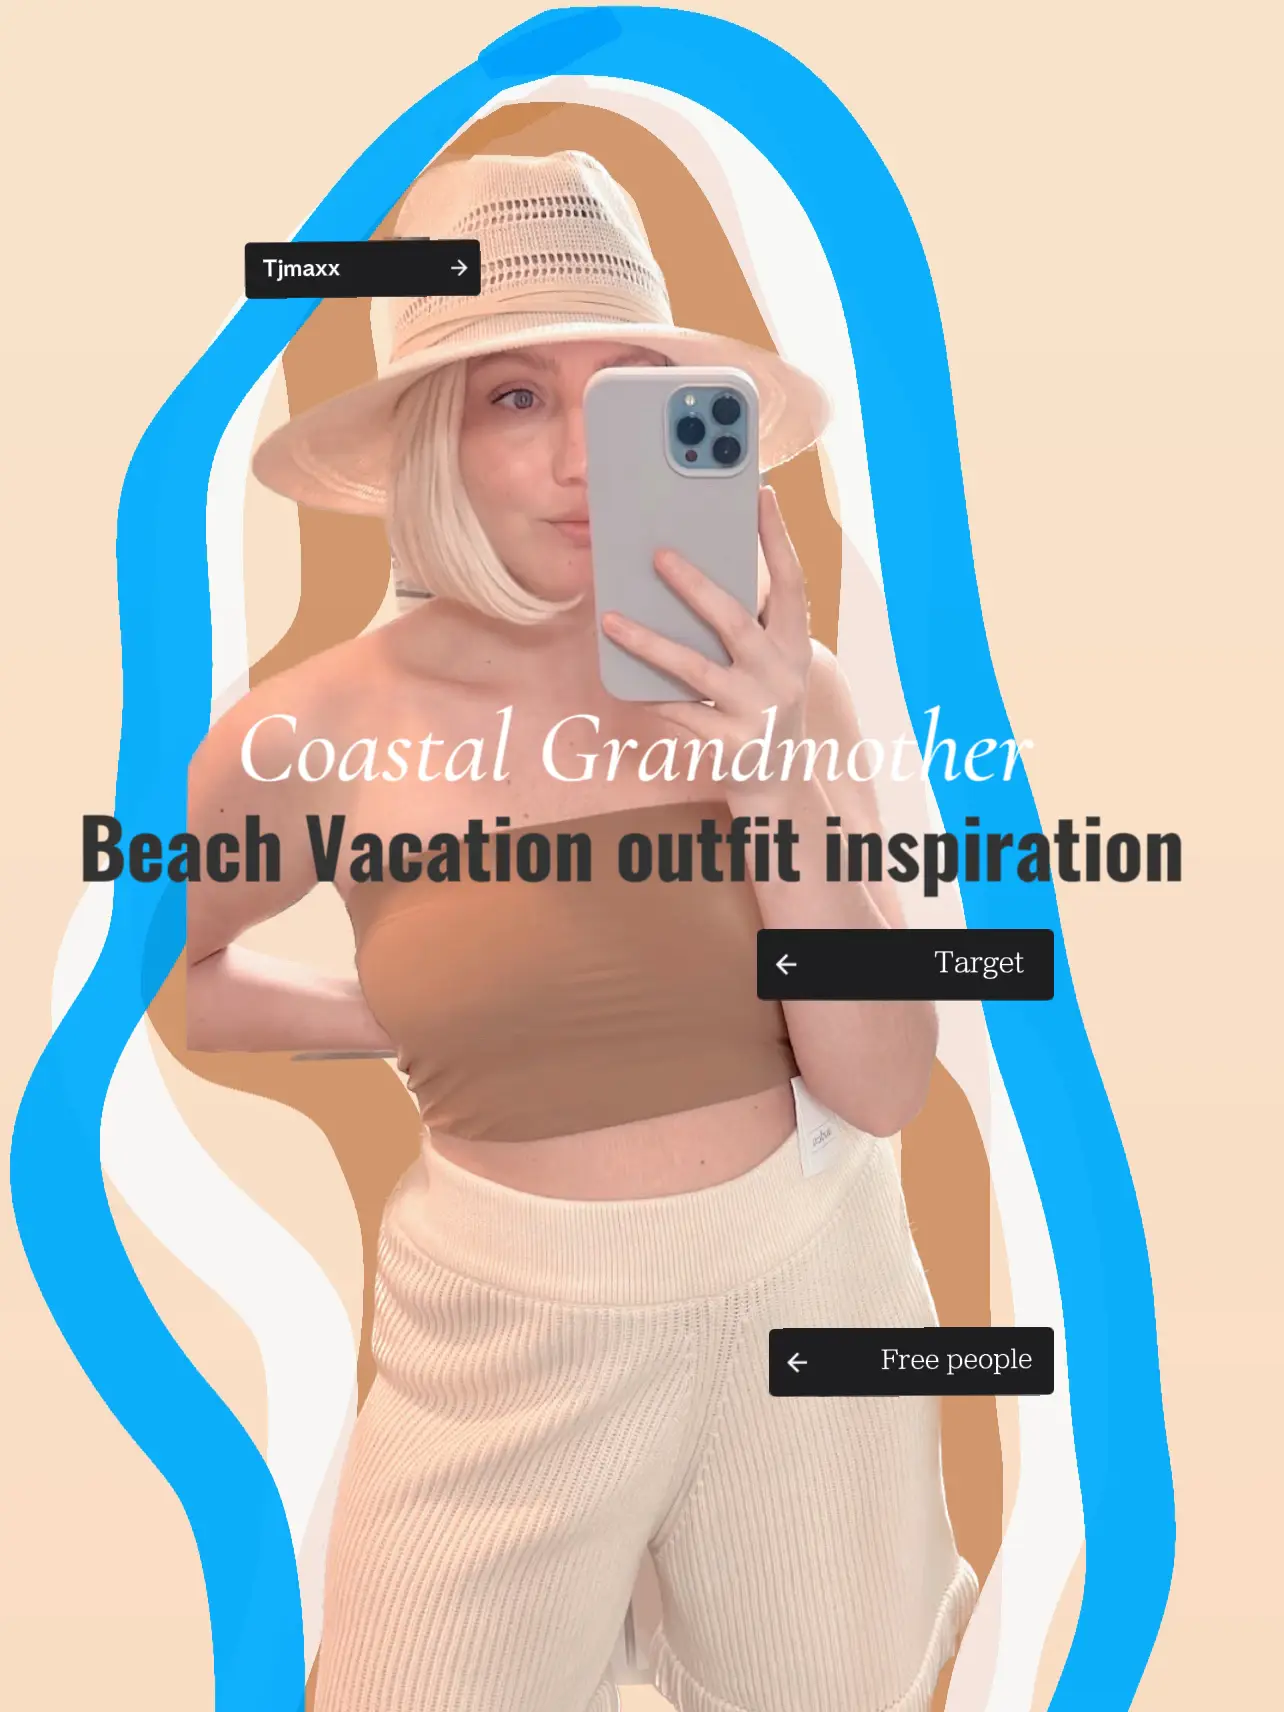 Beach Vacation outfit inspiration 's images